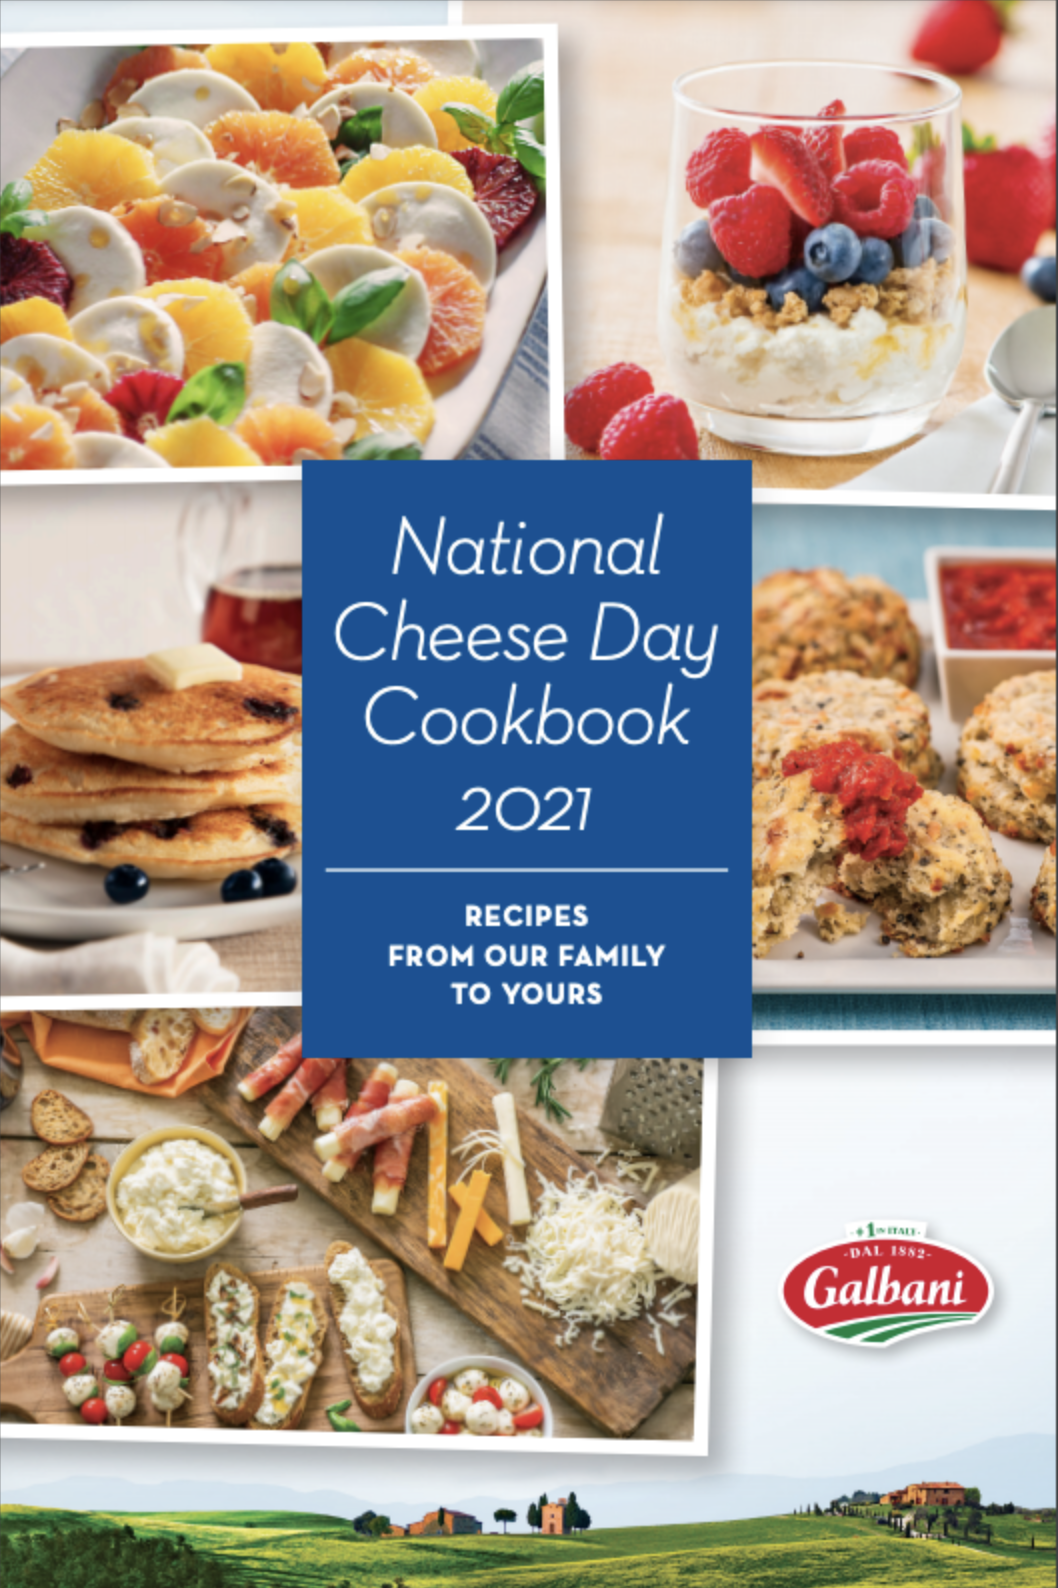 National Cheese Day Cookbook 2021